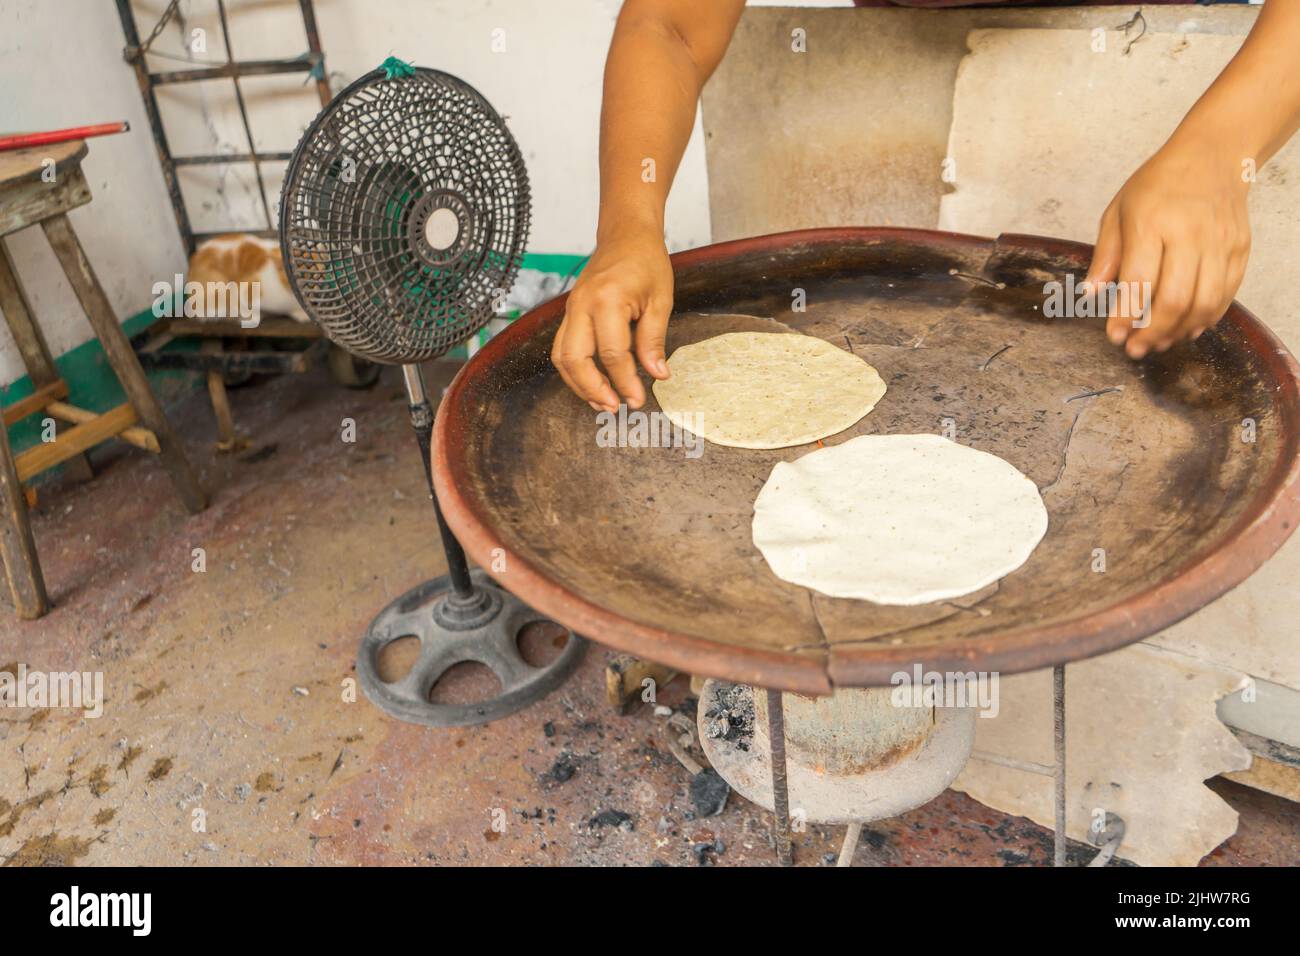 3+ Hundred Comal Con Tortillas Royalty-Free Images, Stock Photos & Pictures